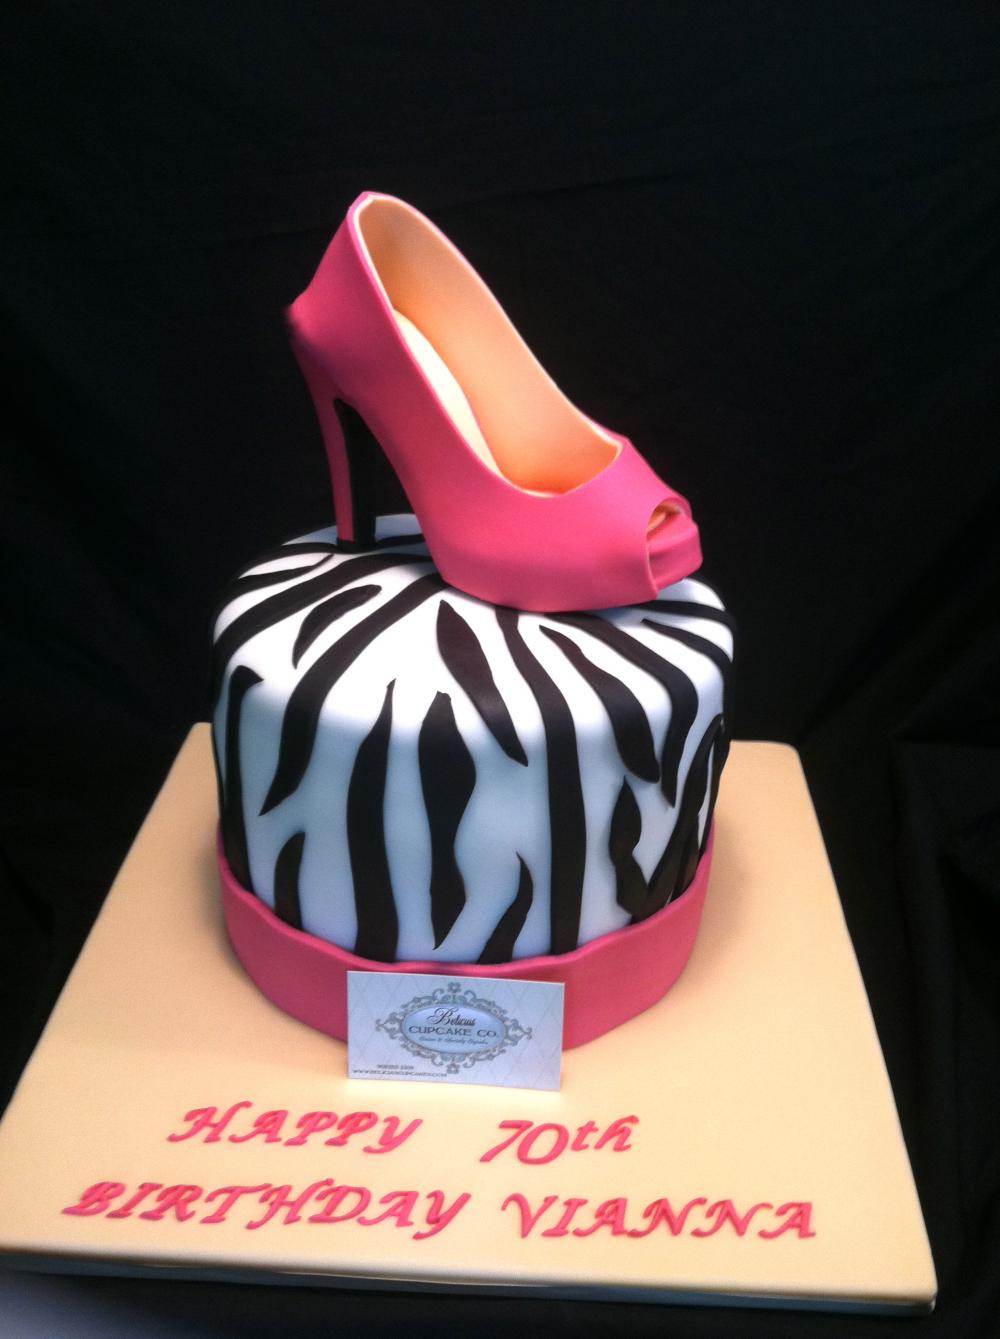 Fondant Shoe Pink Suede Stiletto Cake Topper ,100% Edible, Inspired Shoe Designer Manolo Blahnik, Perfect For Any Shoe Lover